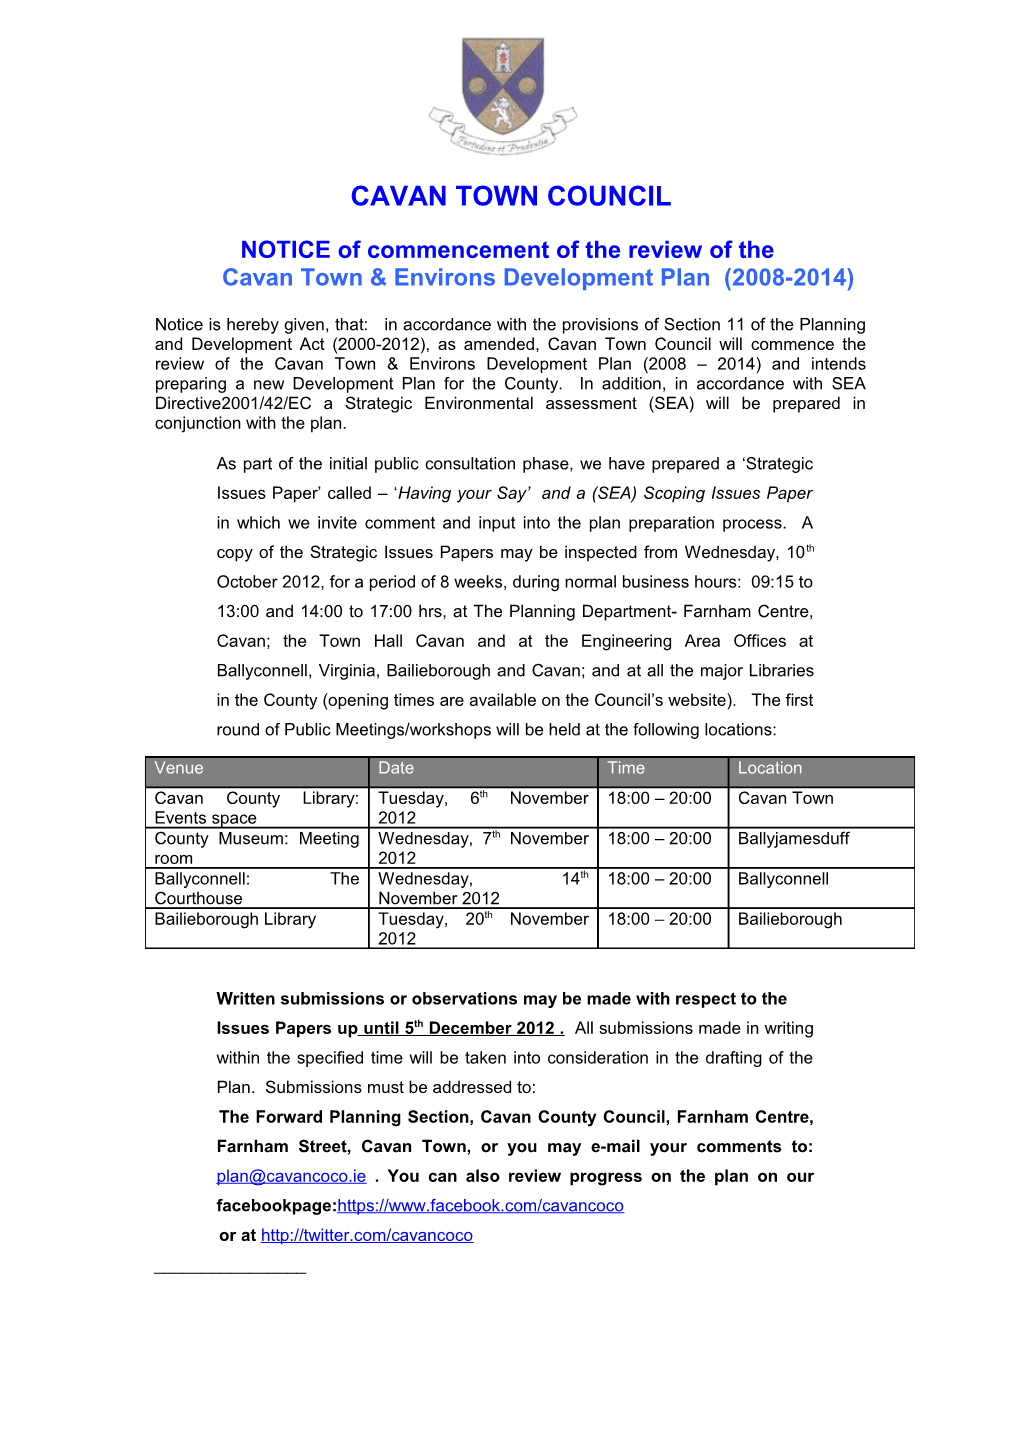 NOTICE of Commencement of the Review of The